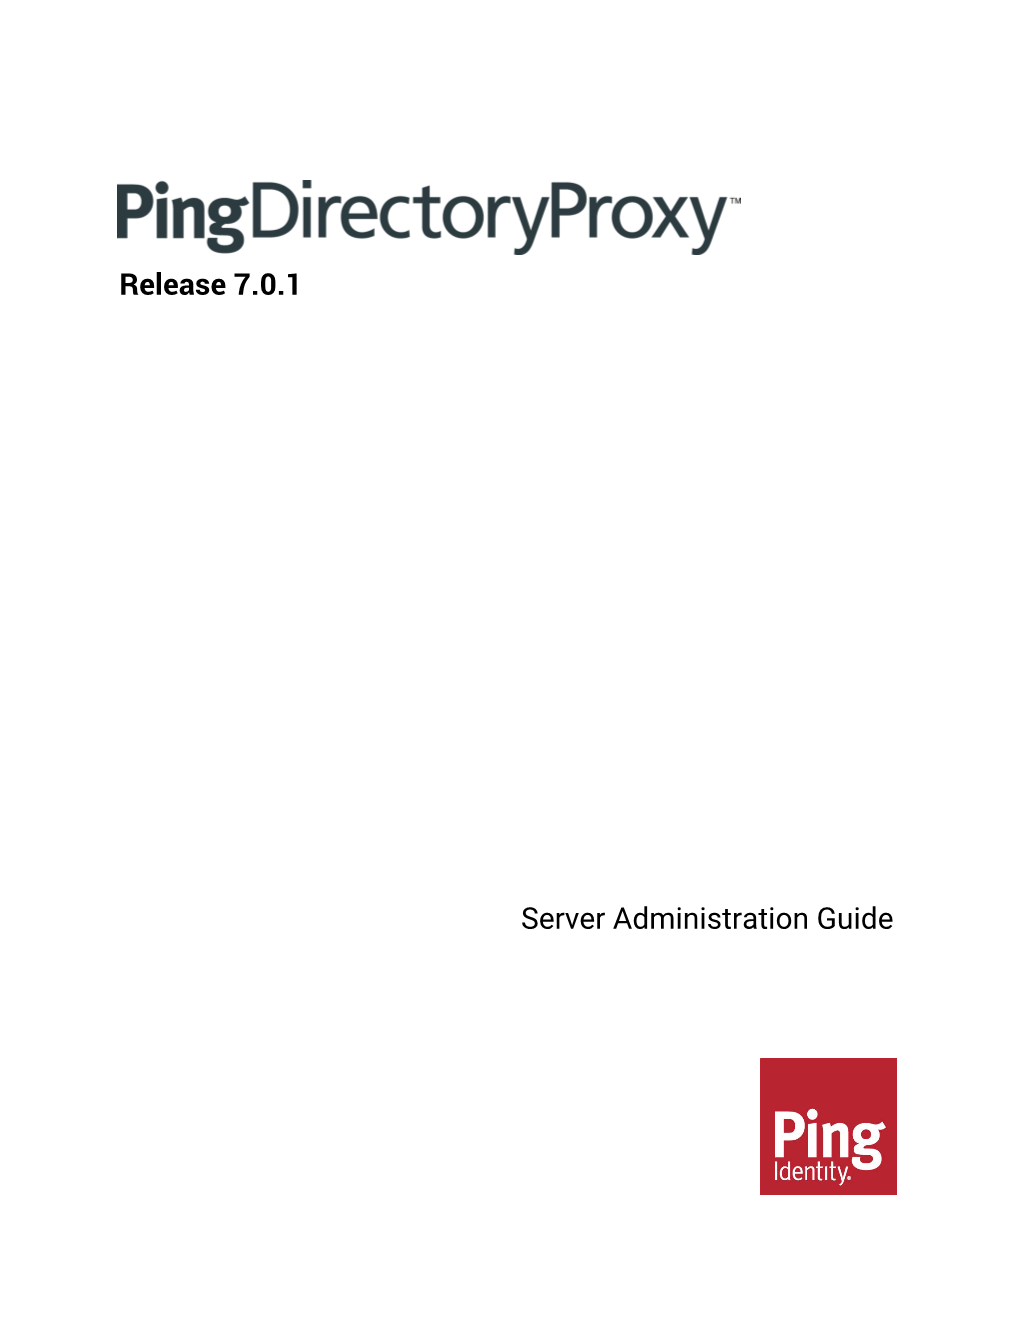 Pingdirectoryproxy Server Administration Guide